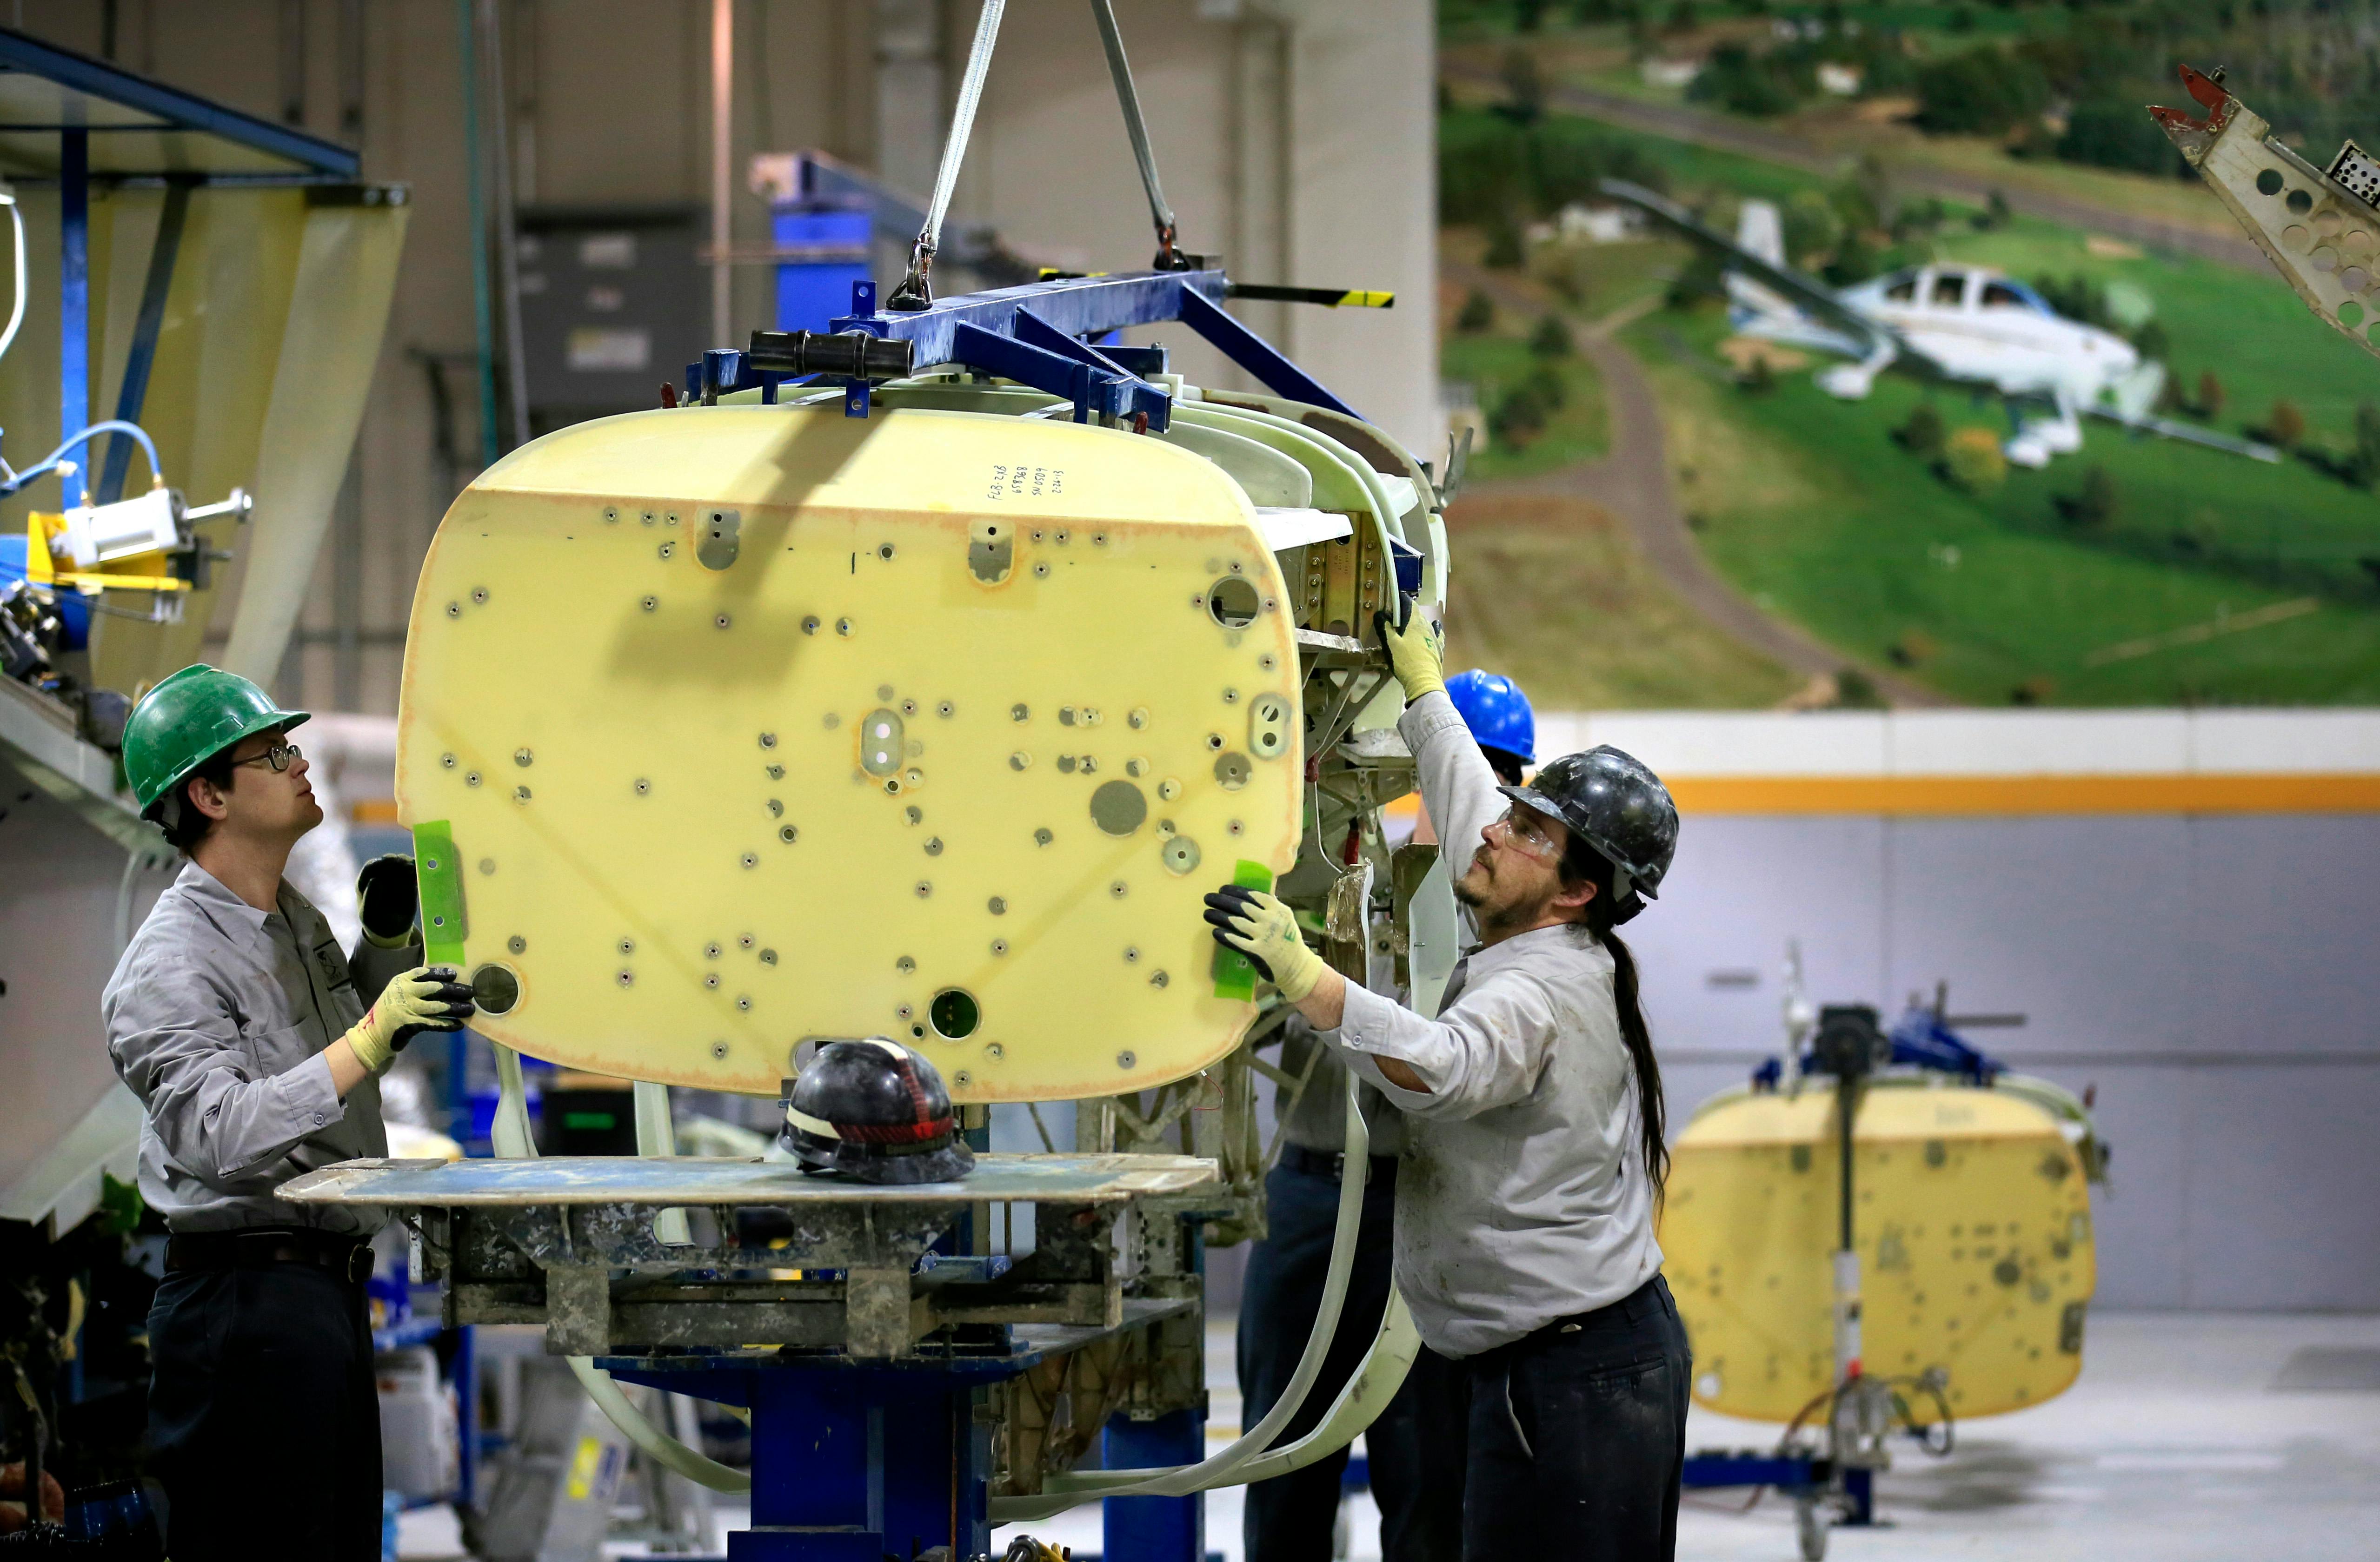 Workers at Cirrus Aircraft in Duluth assemble one of the company's aircraft in 2012.